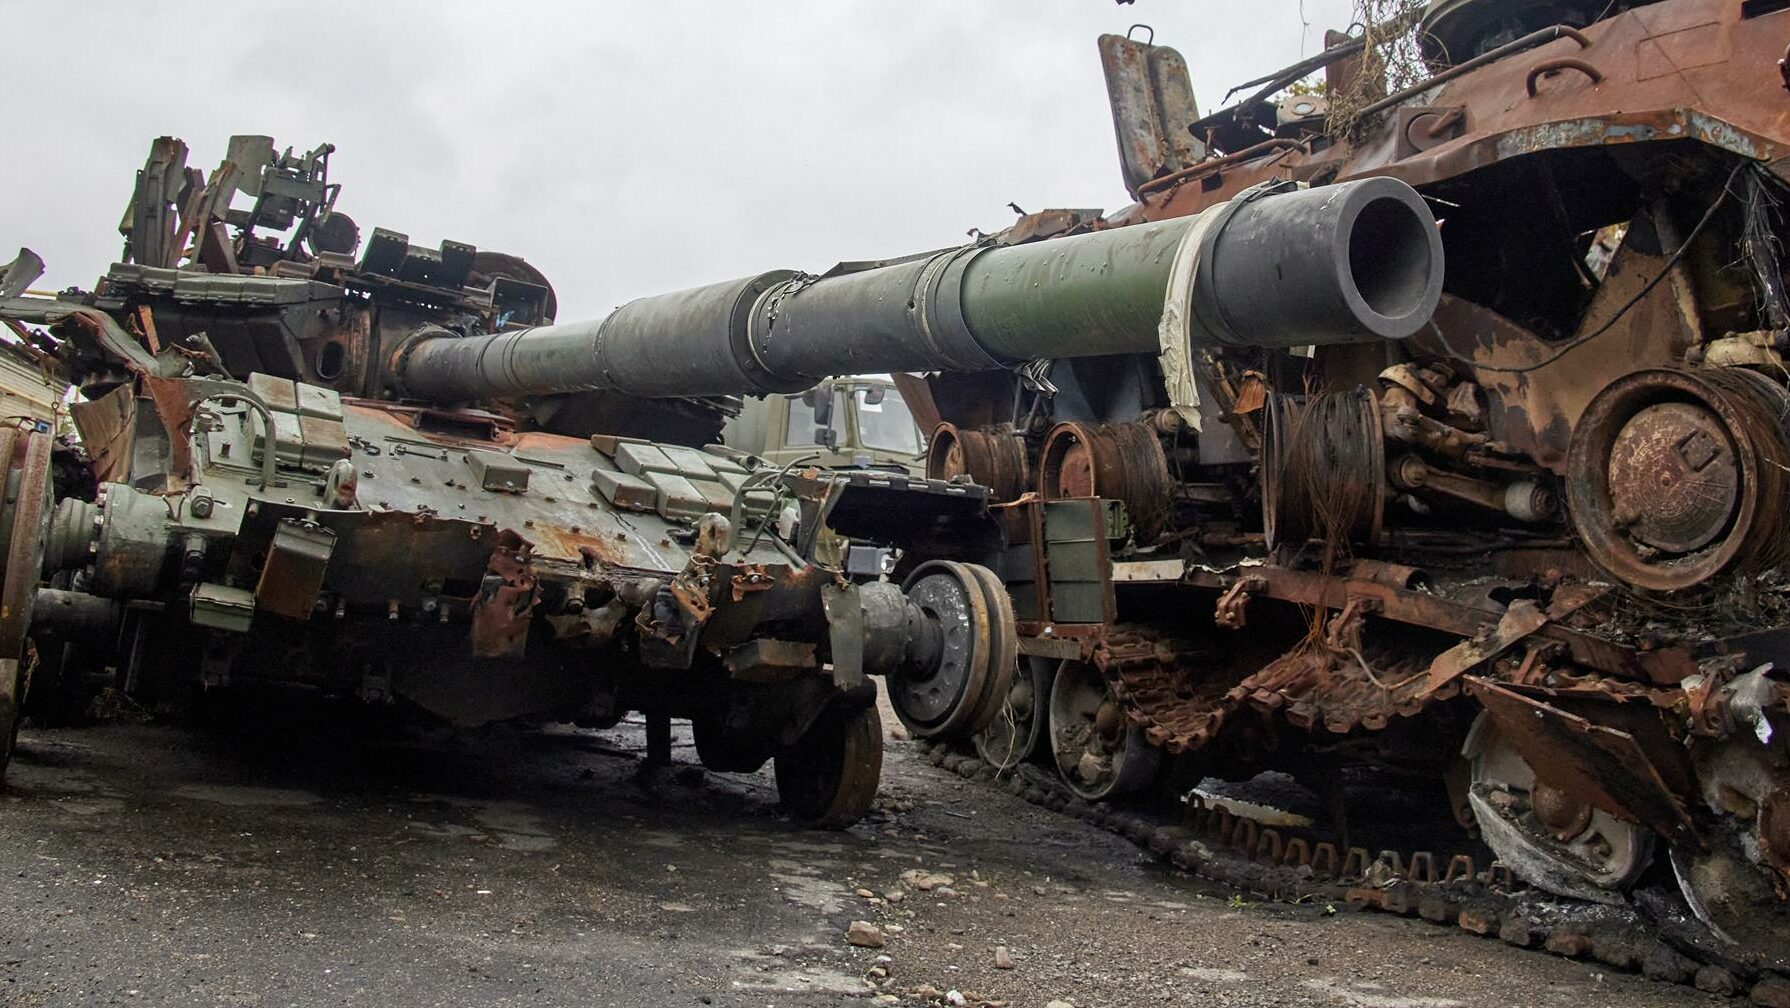 s destroyed Russian military equipment in the recently recaptured city of Lyman